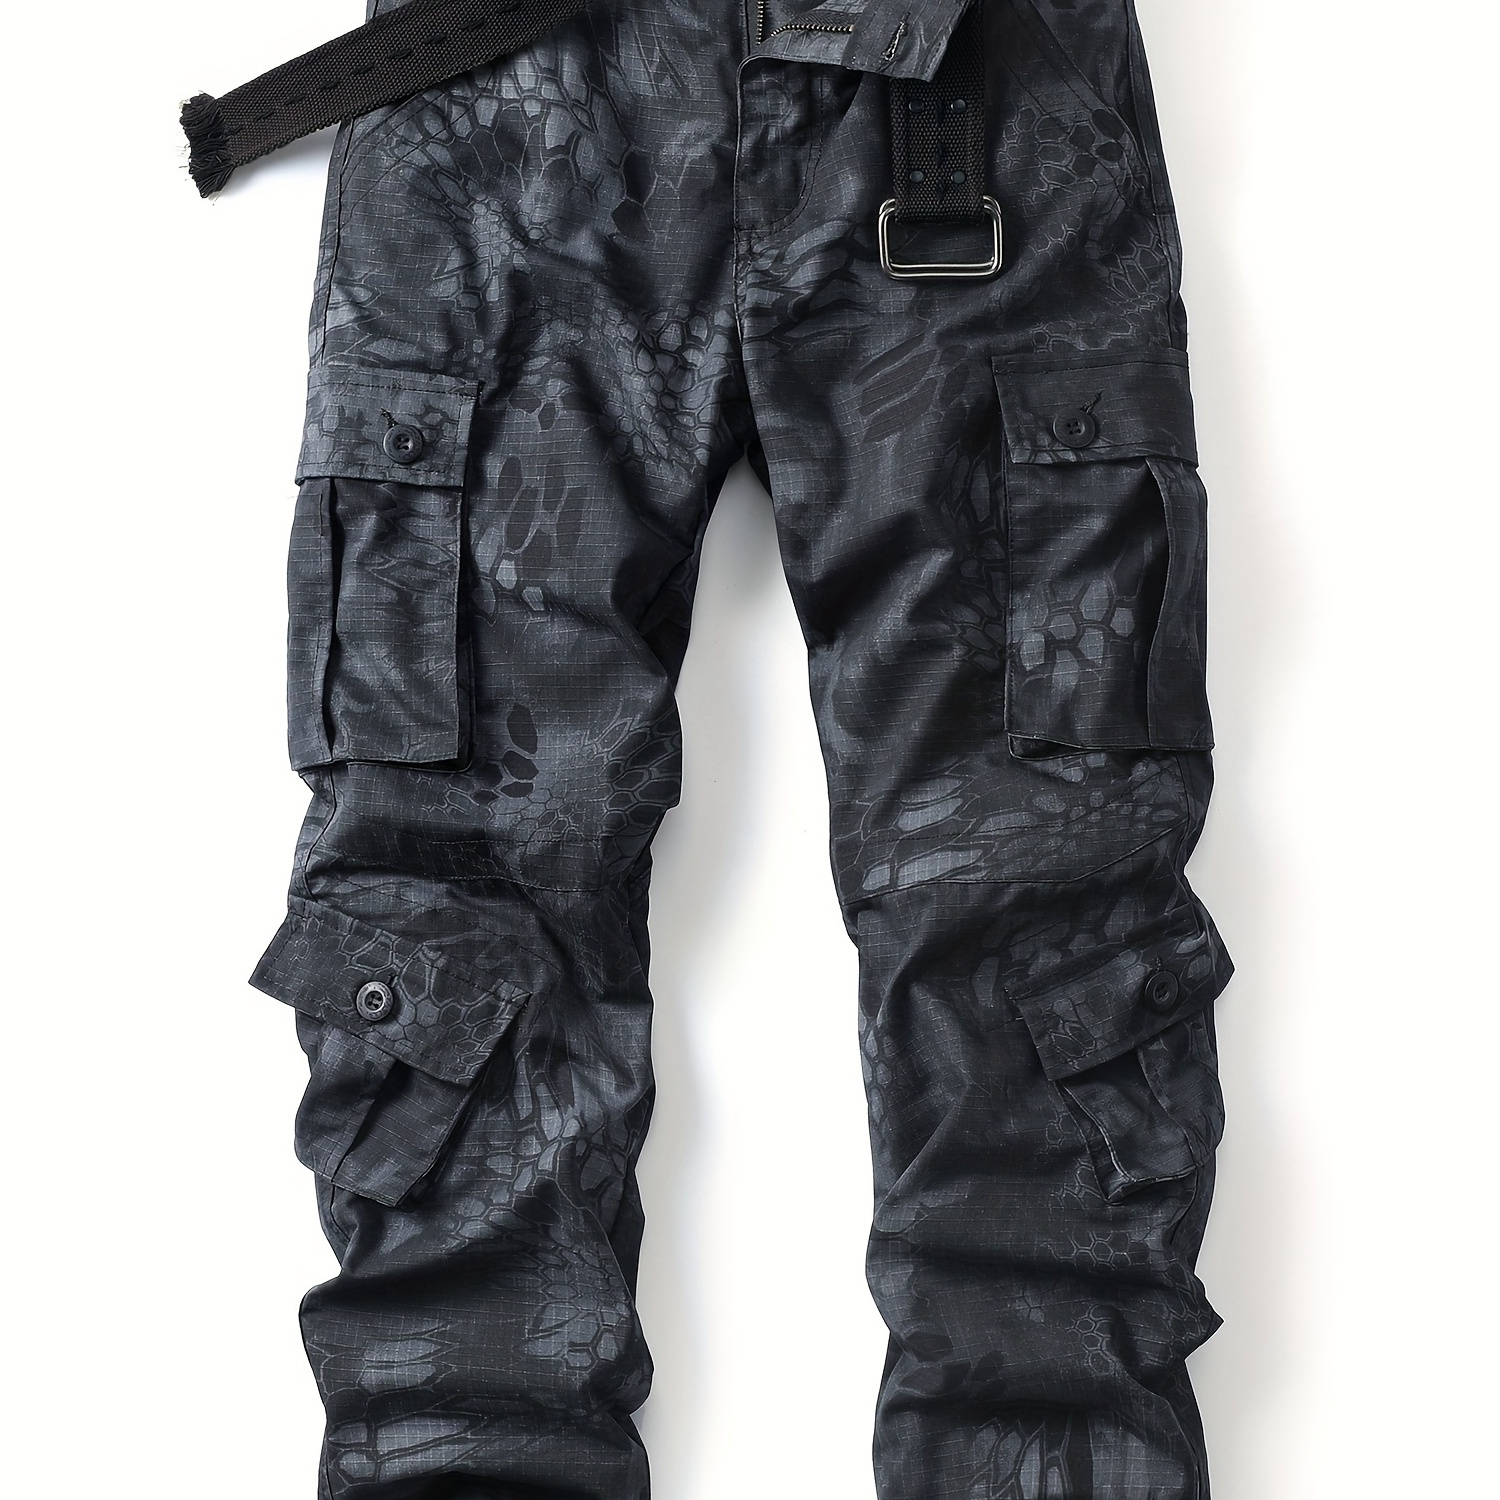 

Men's Trendy Snake Skin Camo Cargo Pants - Multi Pocket Trousers For Outdoor Work And Streetwear